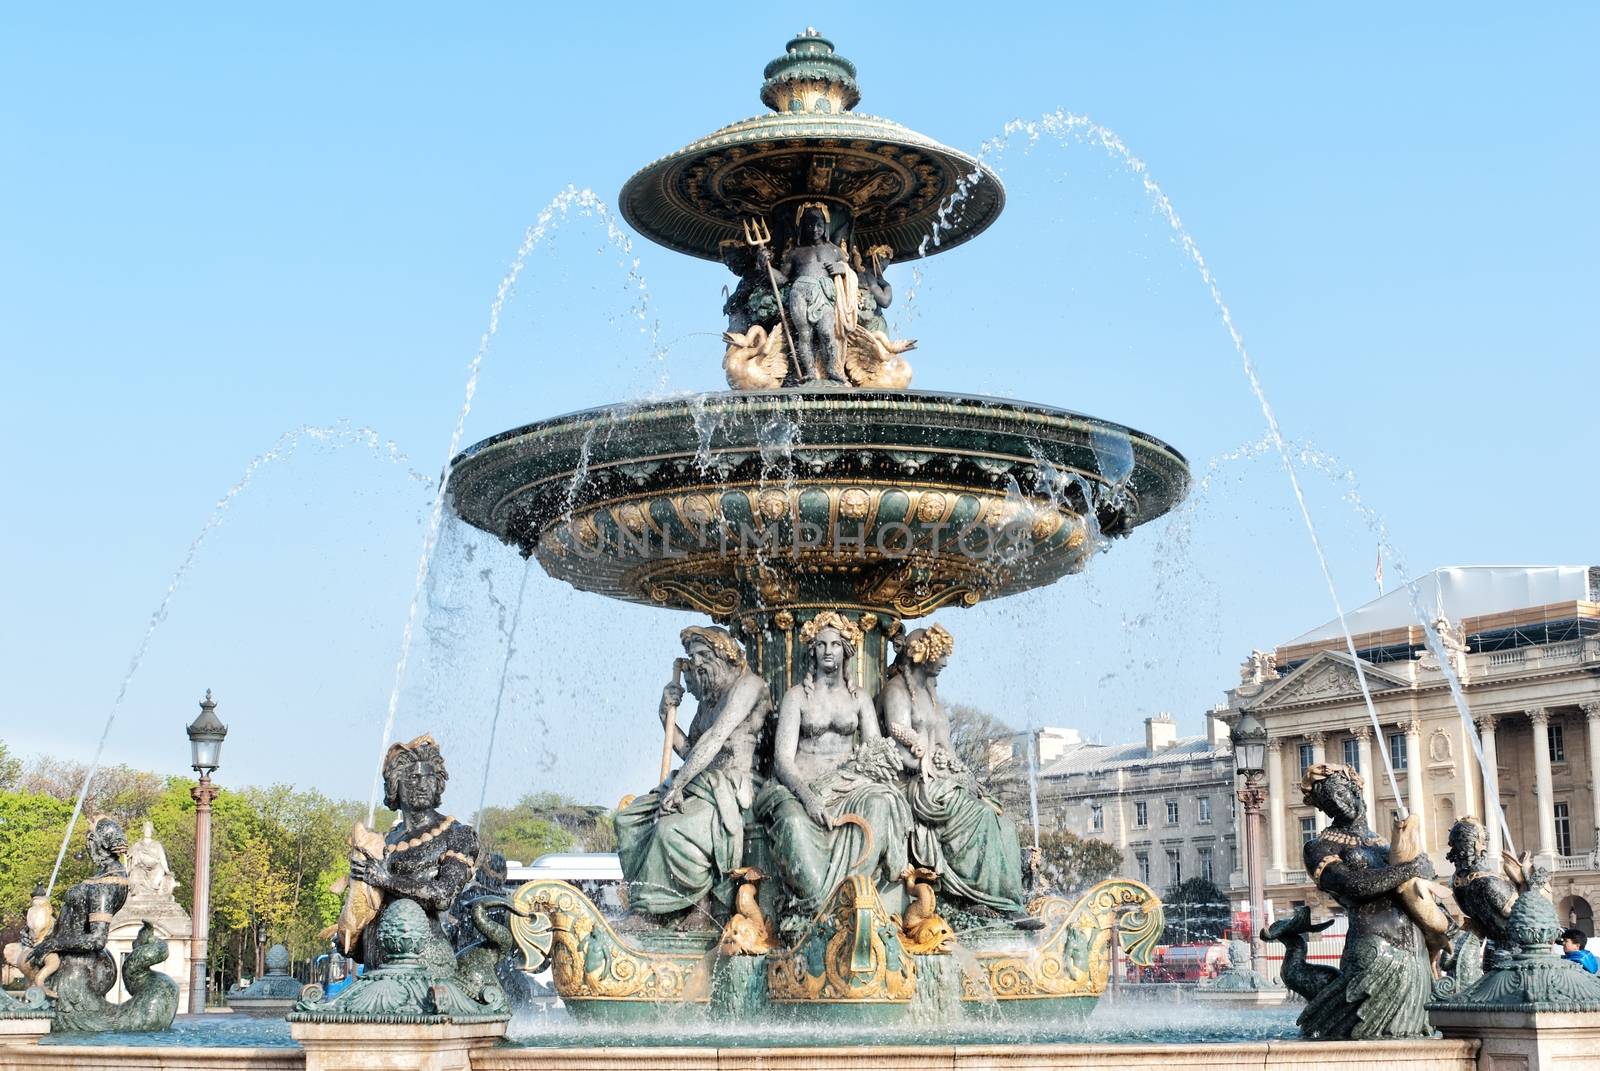 The Place de la Concorde was designed by Ange-Jacques Gabriel in 1755 and now it is the largest square in Paris.